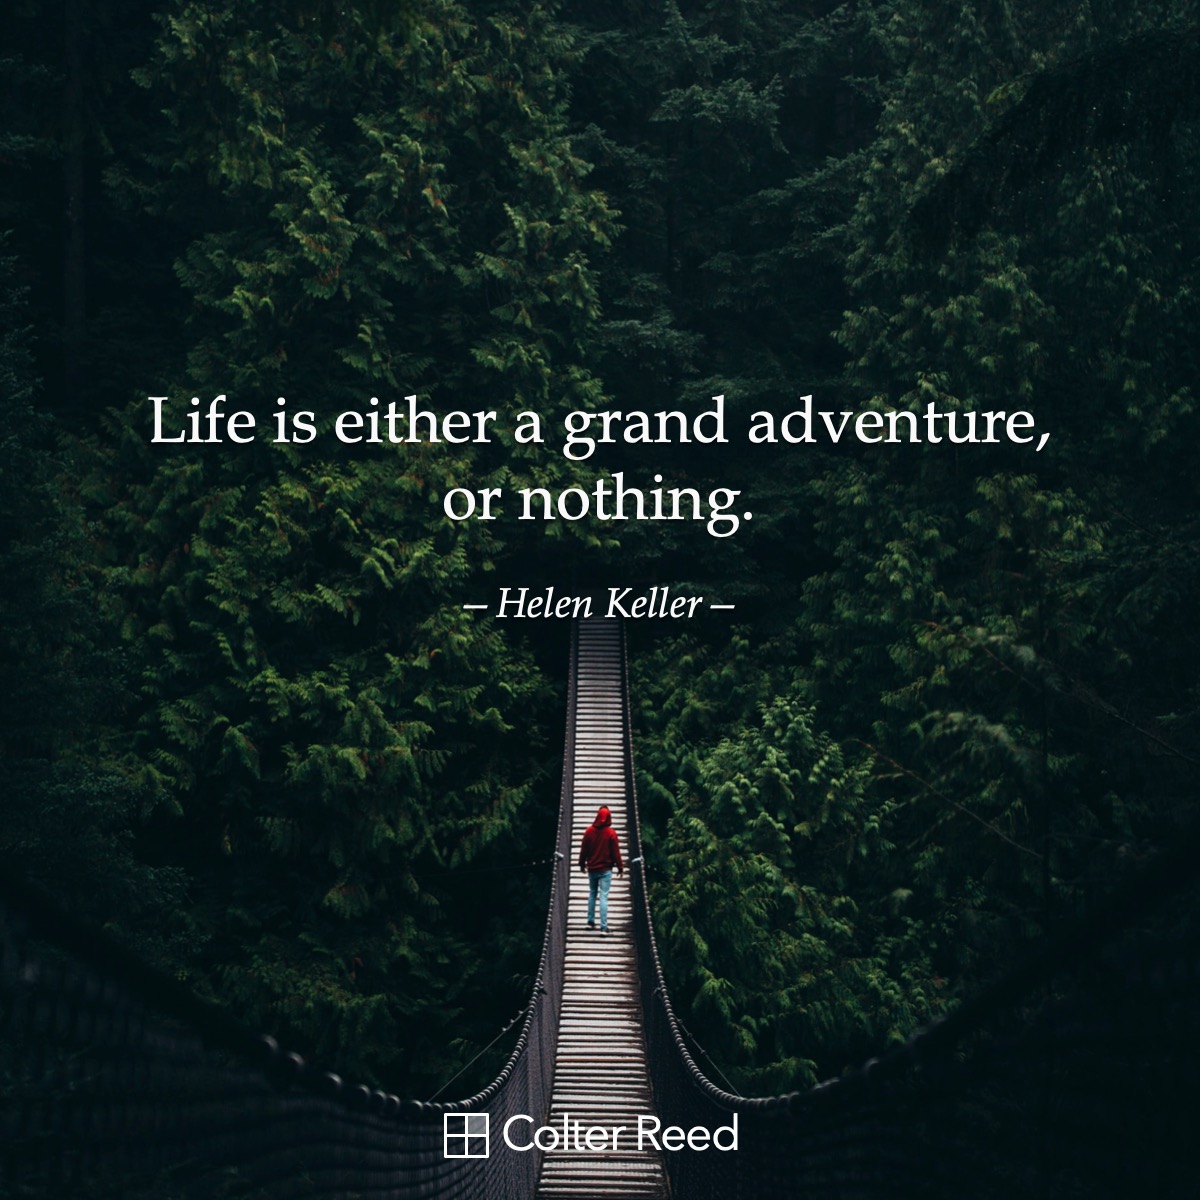 Life is either a grand adventure, or nothing. —Helen Keller